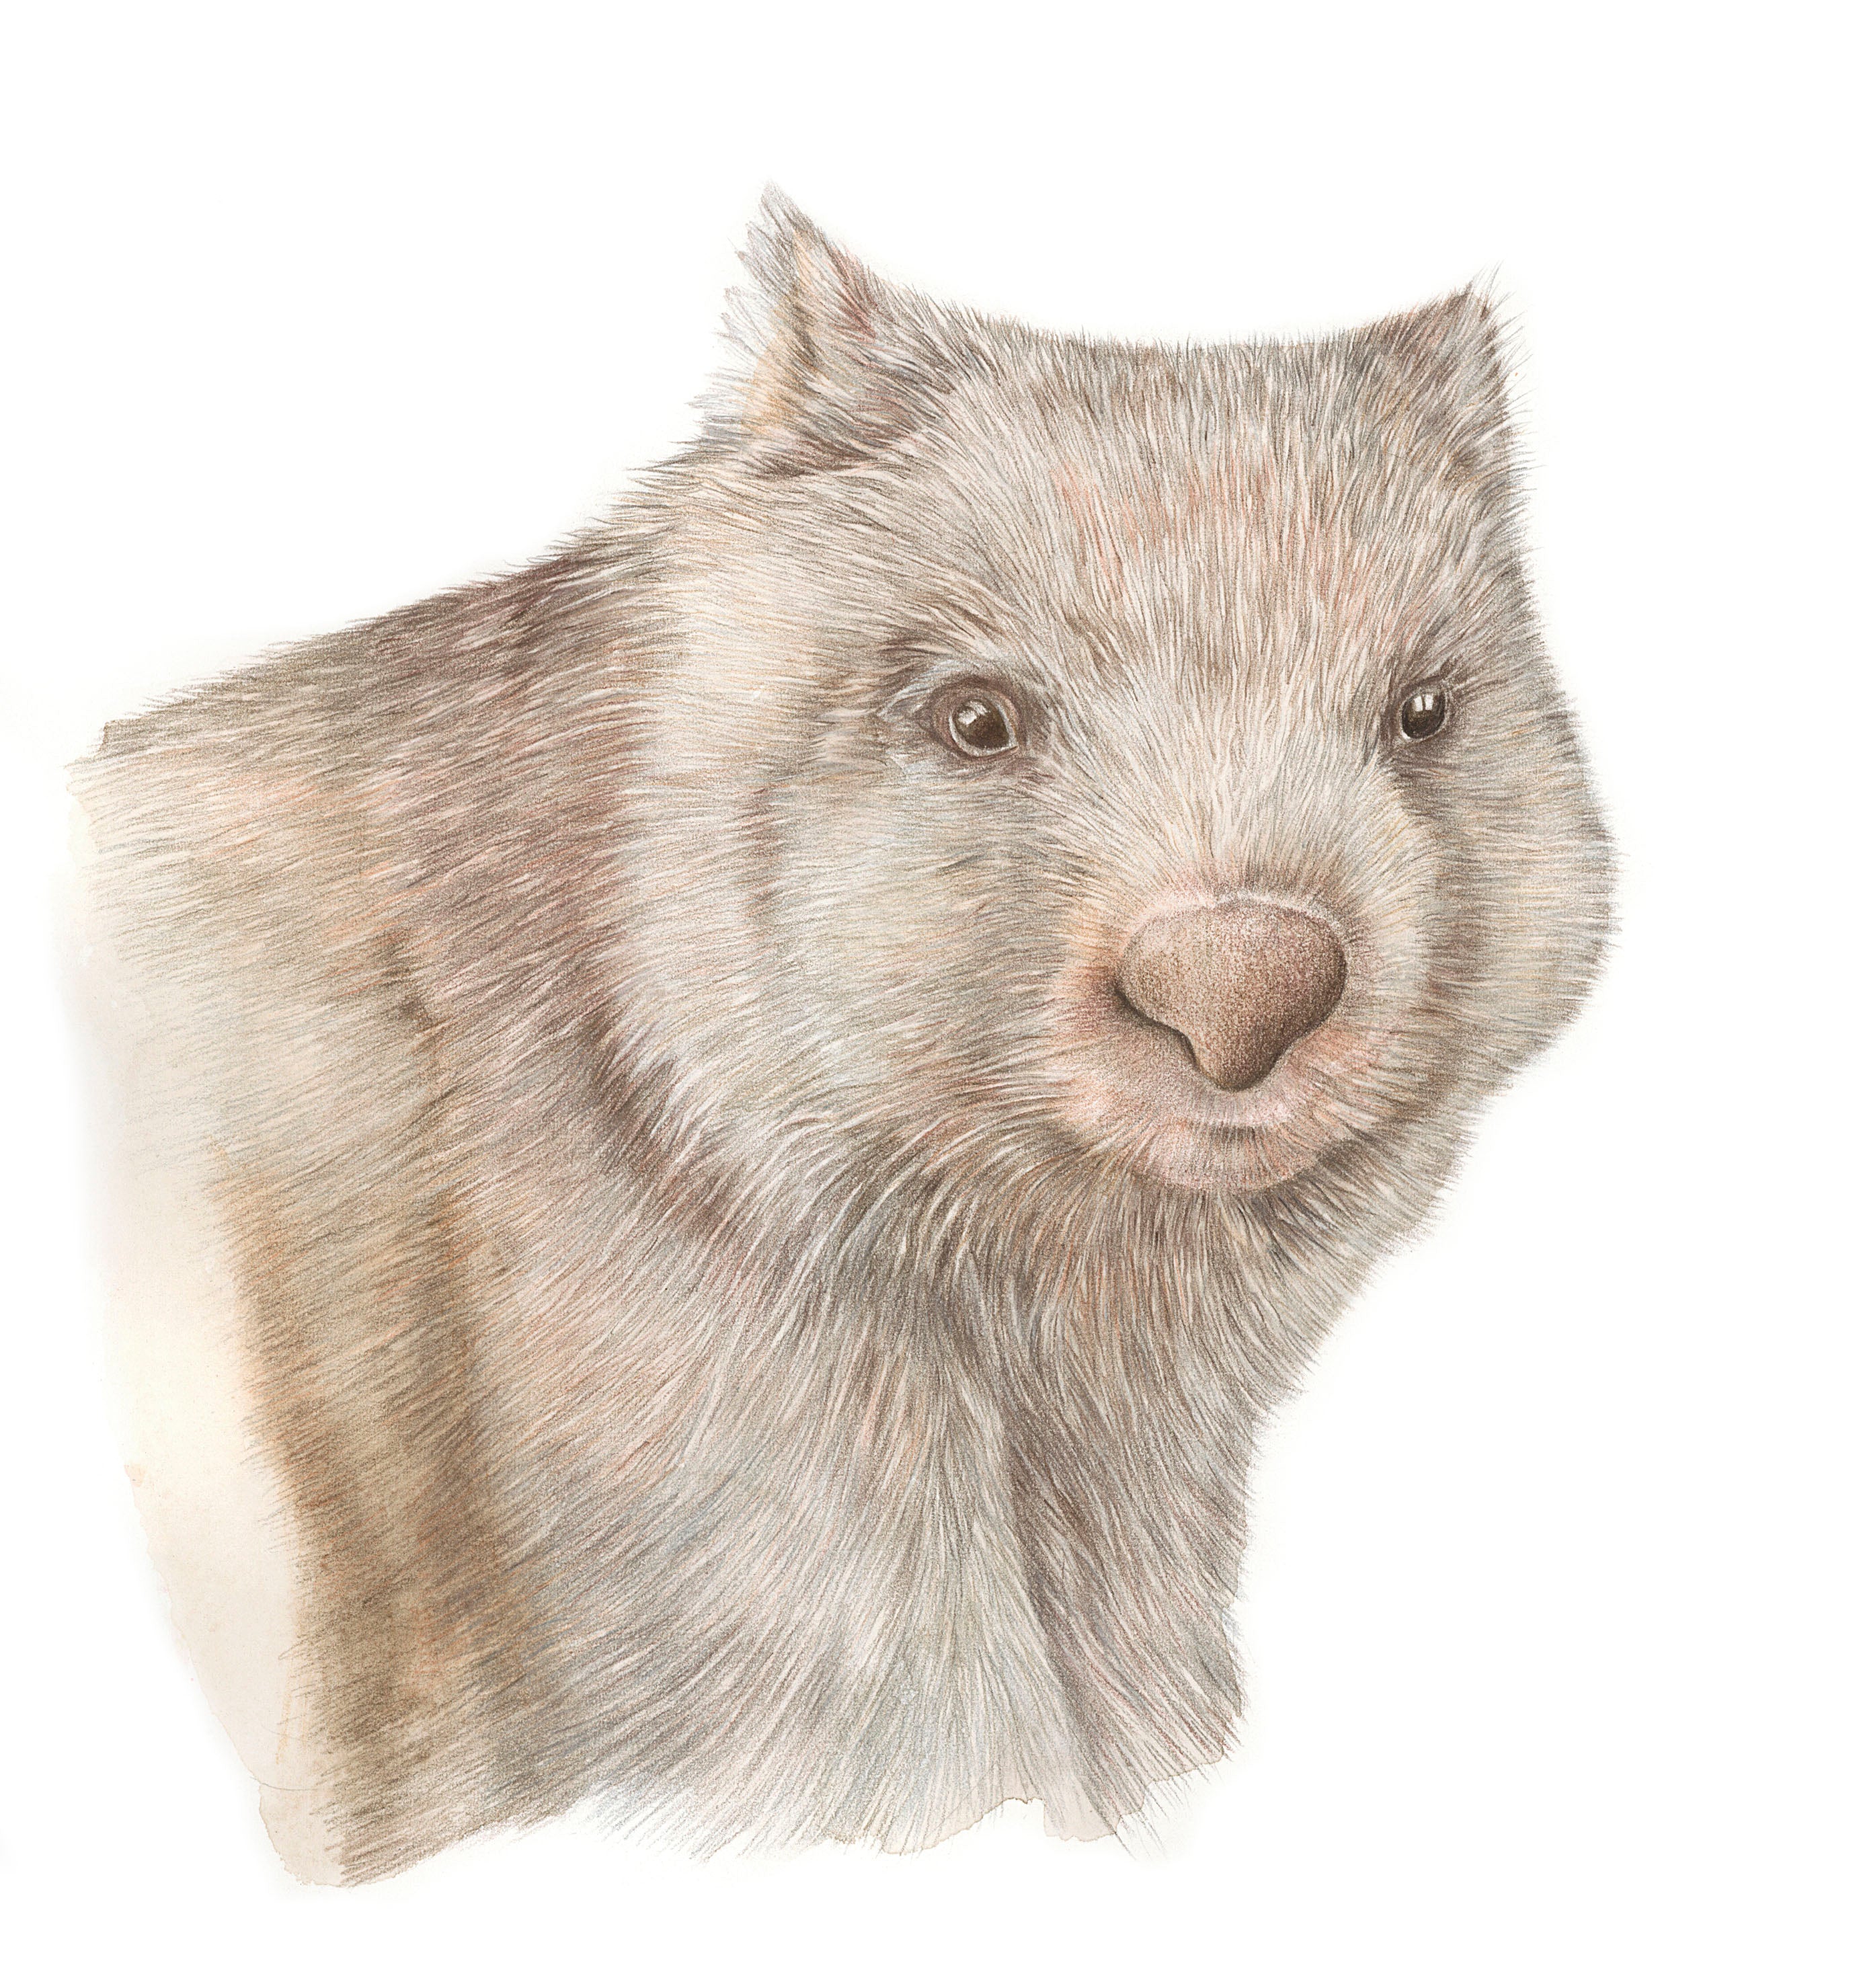 Wombat from Alison Dickin Botanical and Wildlife Artist